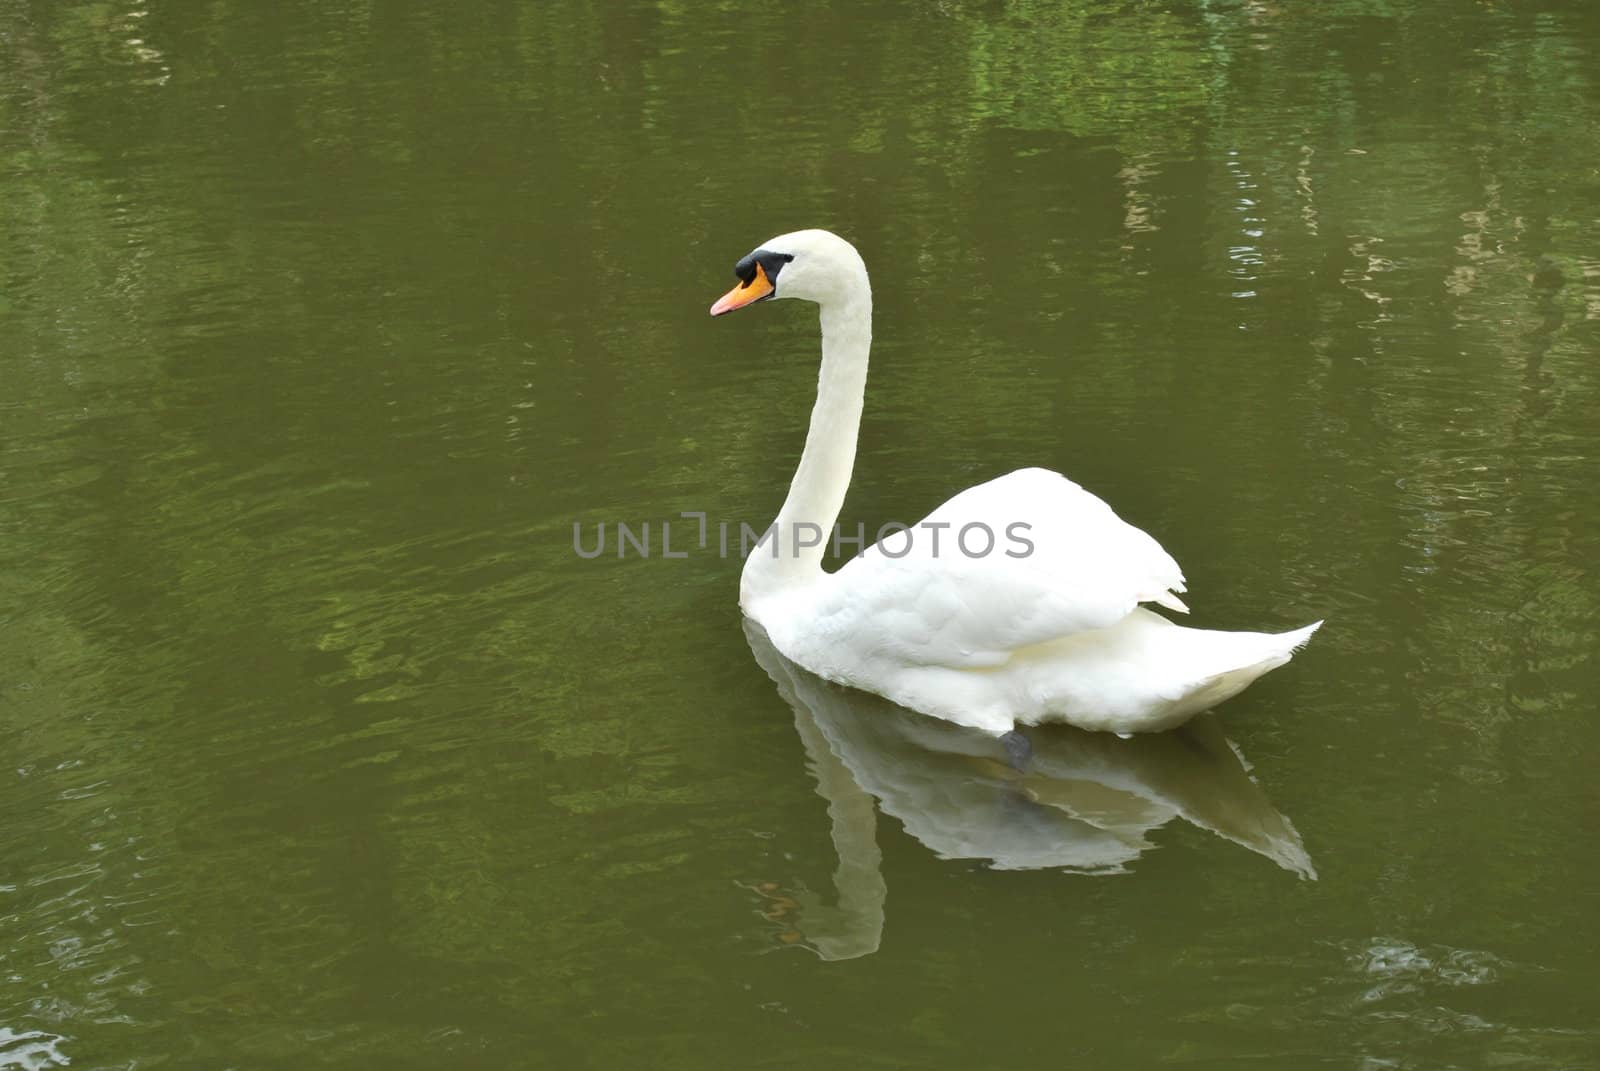 Mute swan on a lake by luissantos84